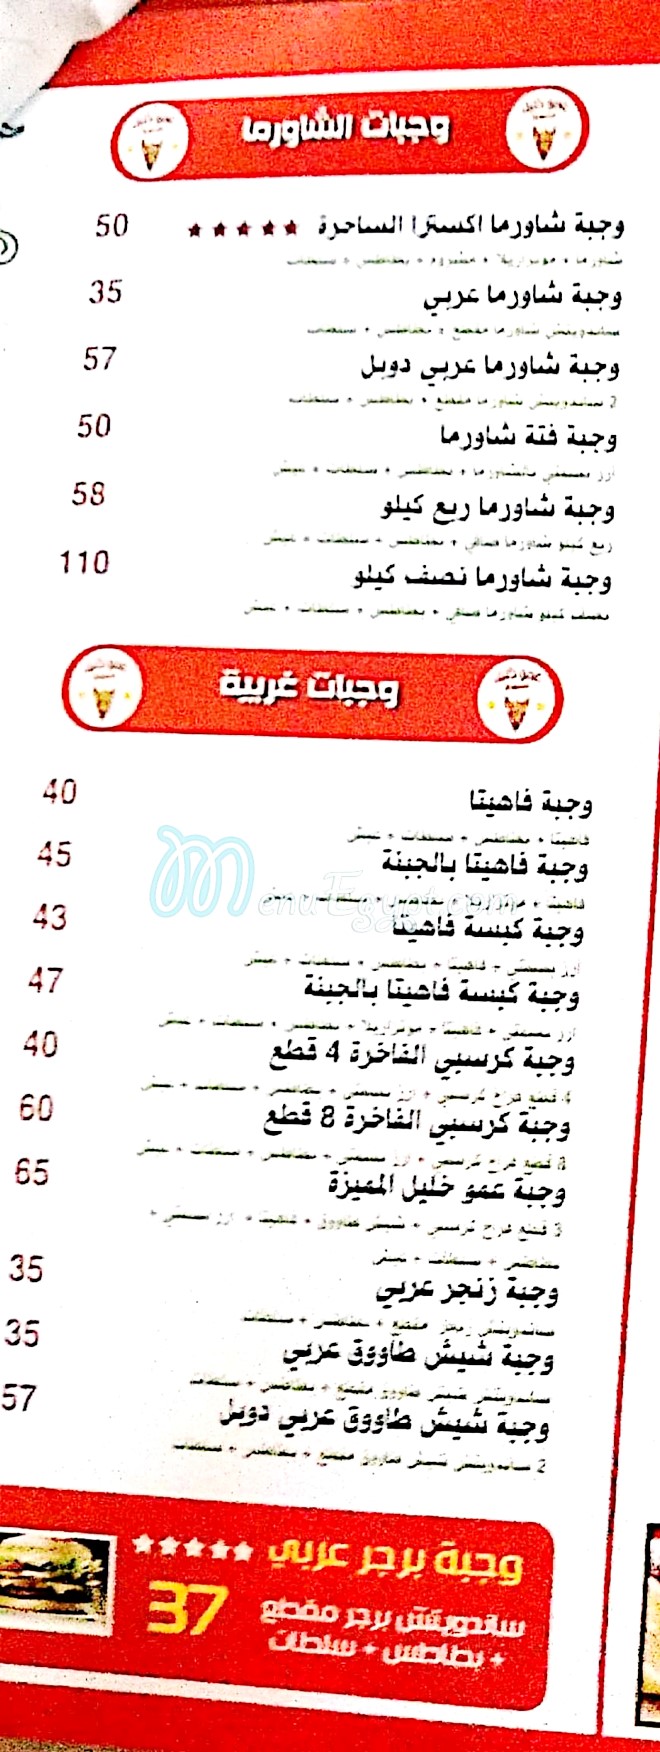 Ammo Khalil ElSoury delivery menu